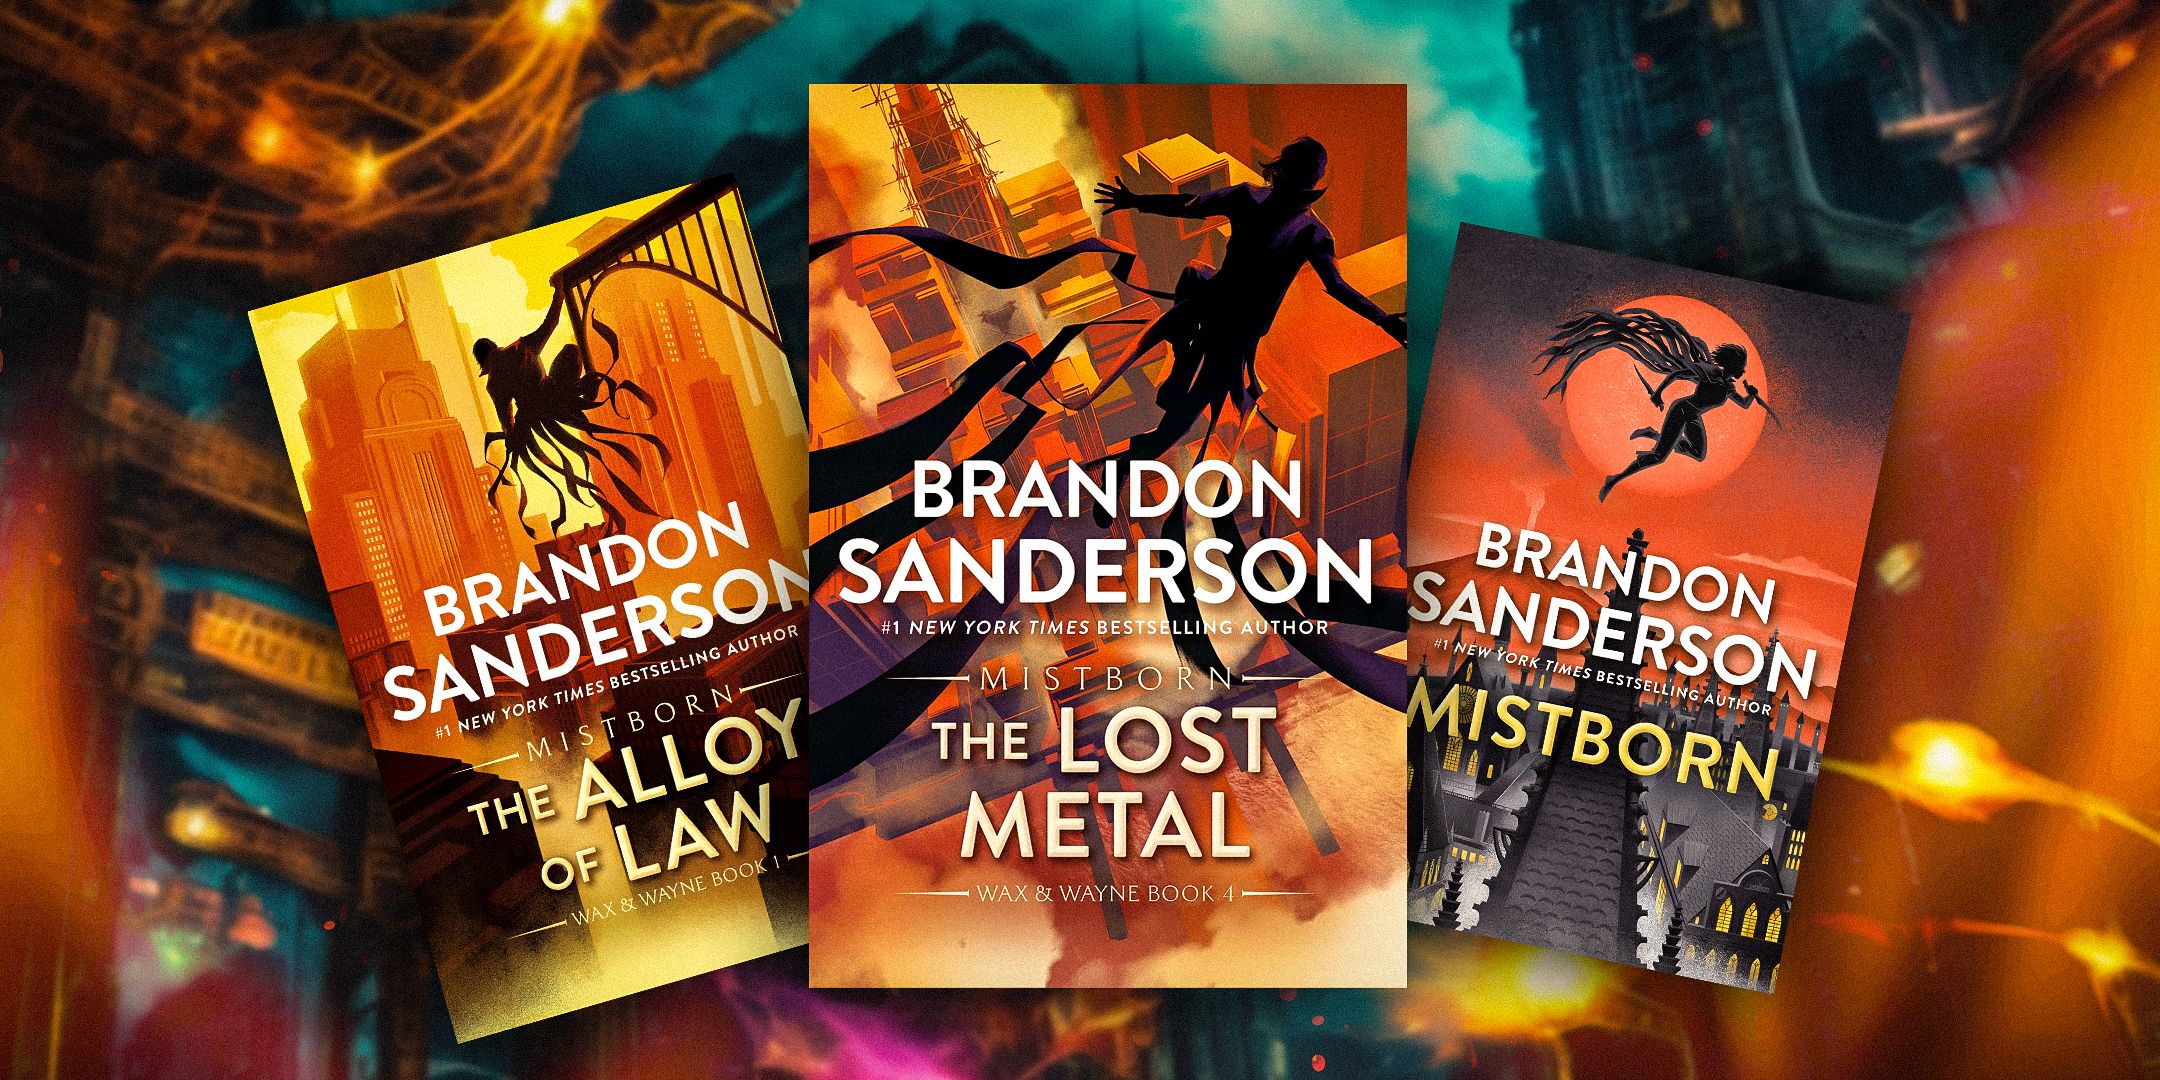 I hope the next Mistborn series revives the best part of the original books